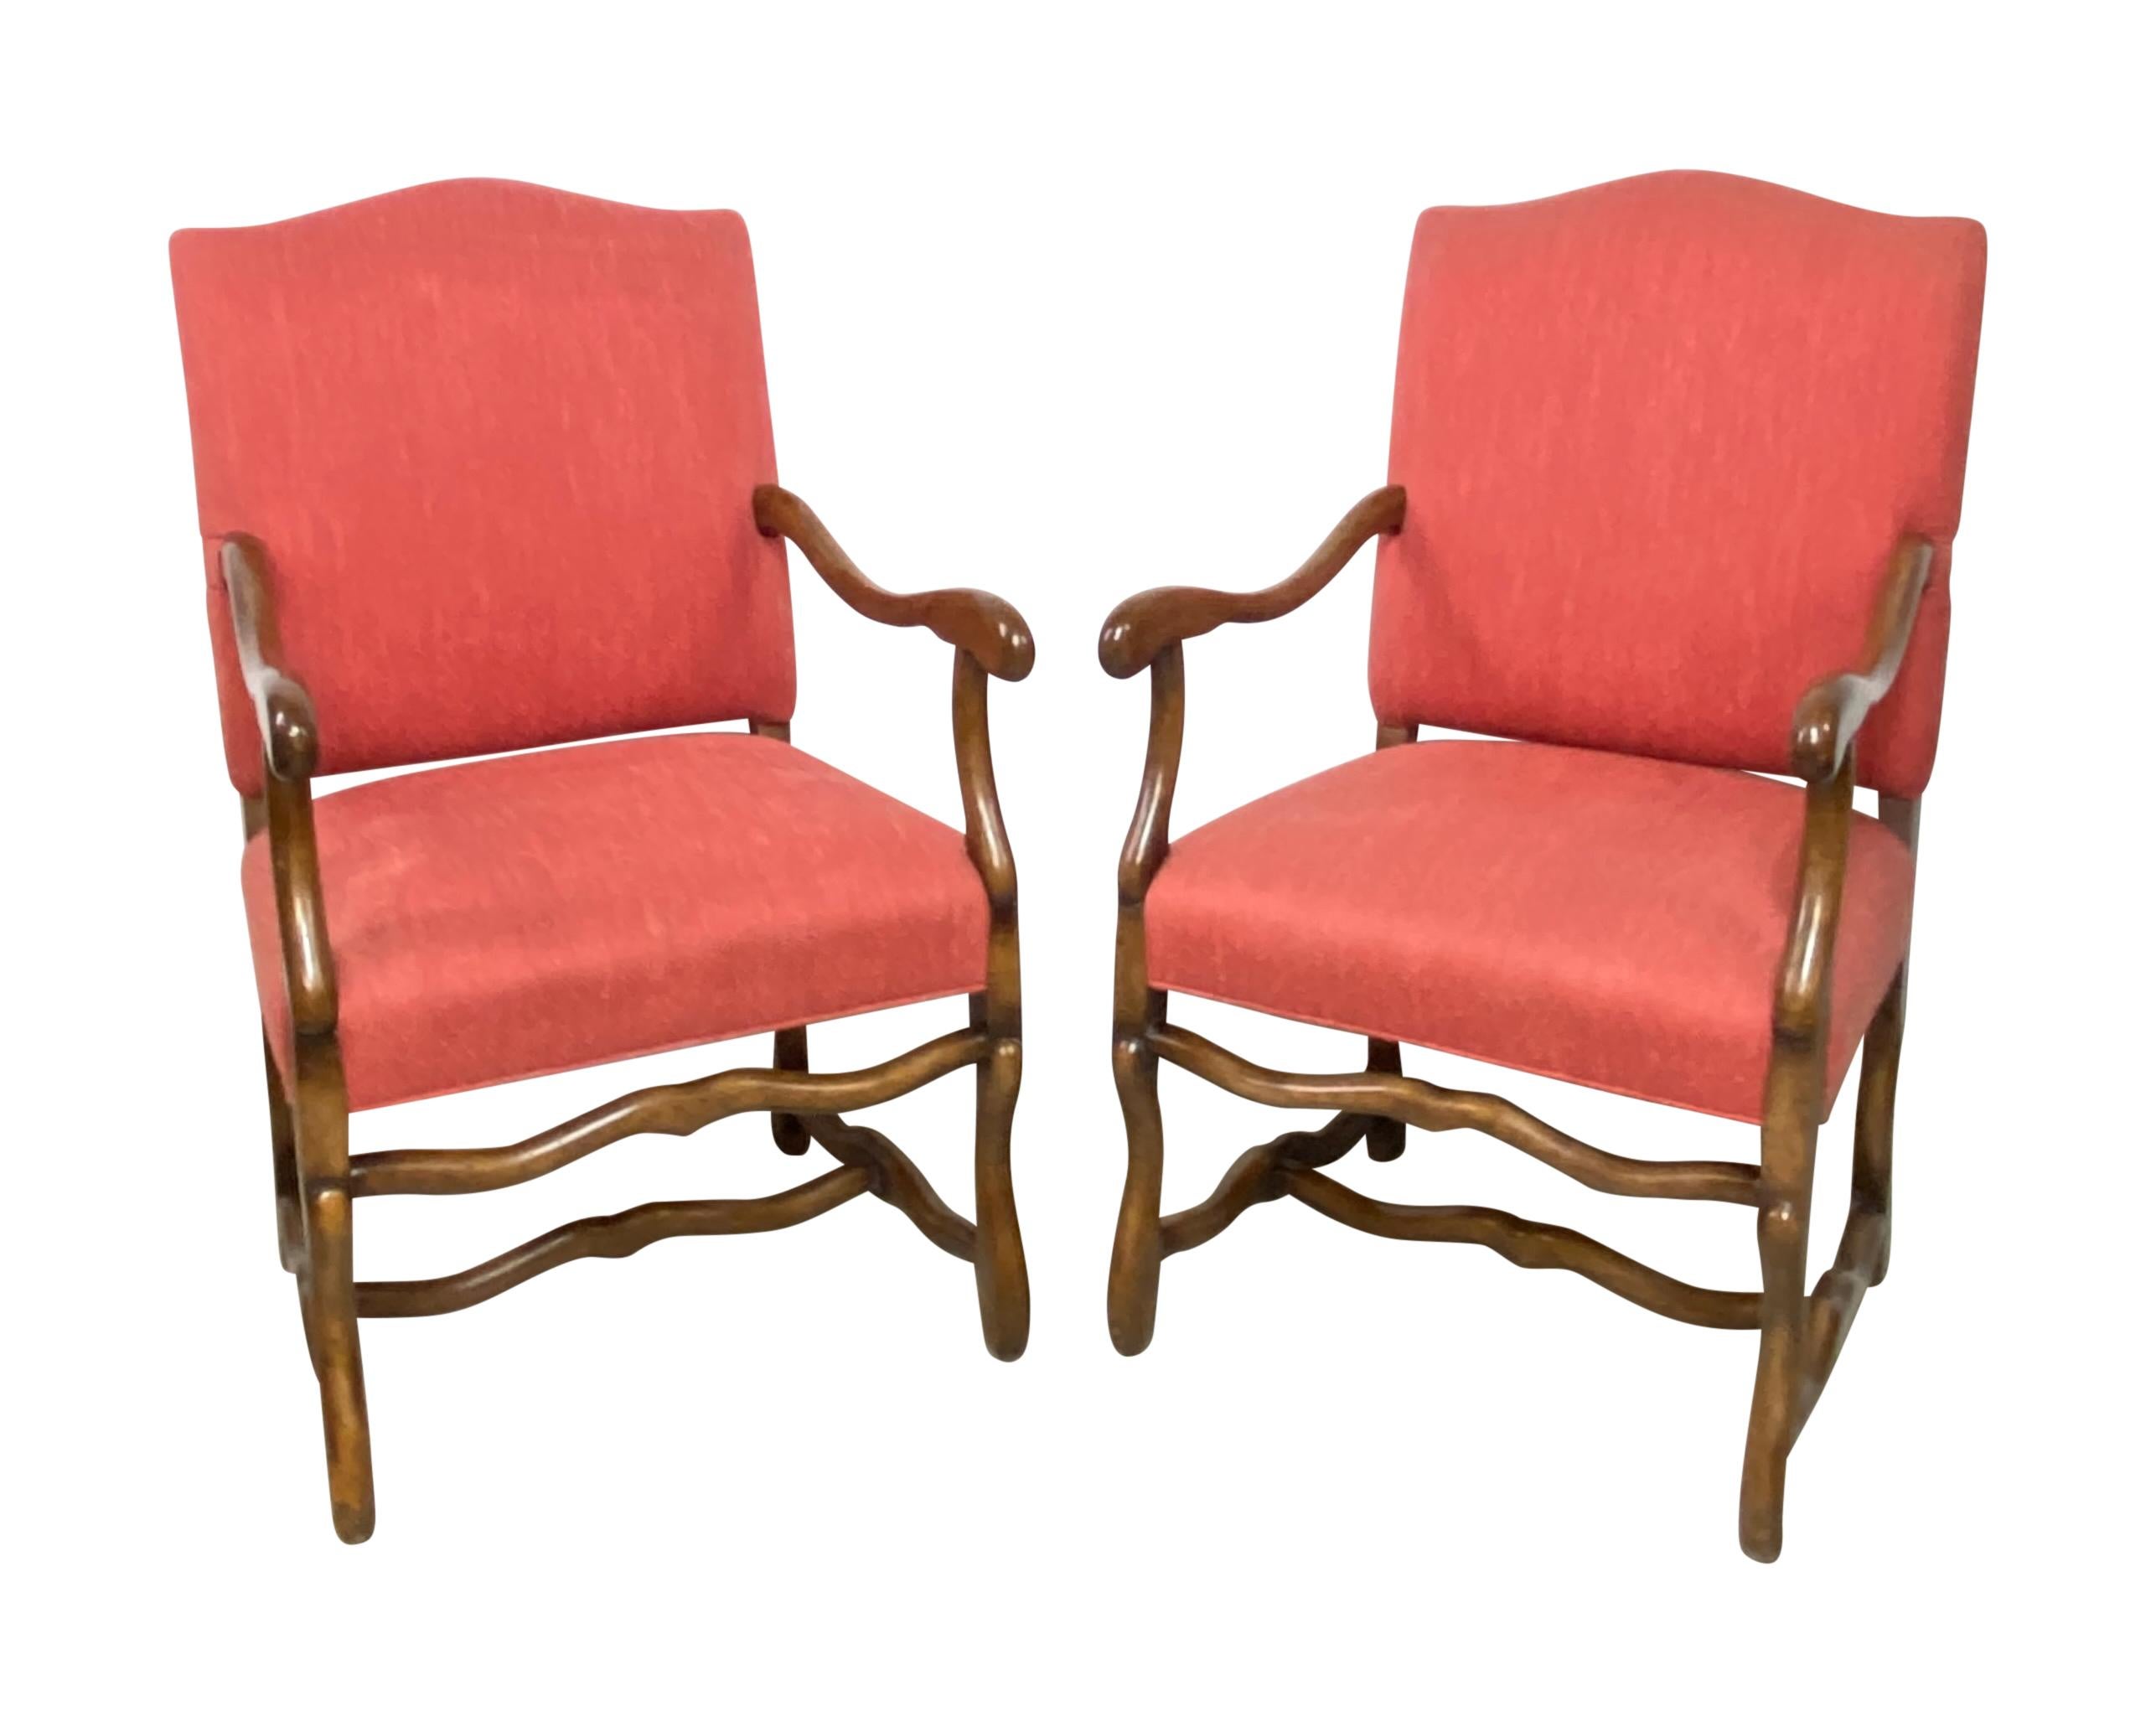 A pair of quality bench made walnut armchairs. Made in the early 20th century in the same manor as period chairs but with spring seats. 
Old nicely distressed finish. 
Upholstery is a salmon colored wool Herringbone tweed in fair condition. Buyer